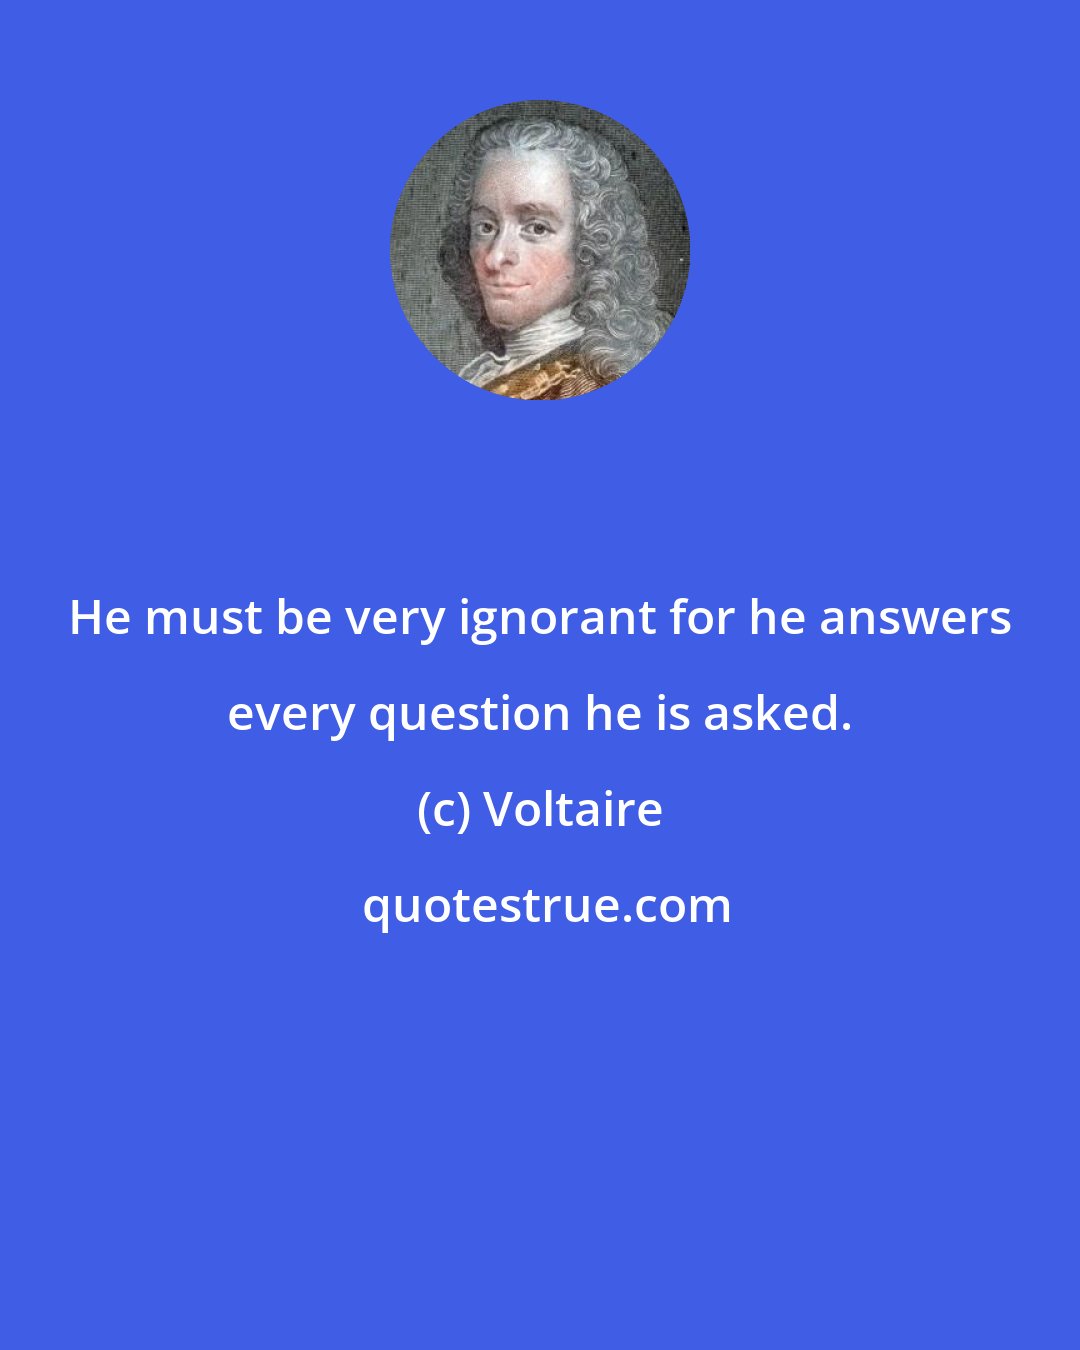 Voltaire: He must be very ignorant for he answers every question he is asked.